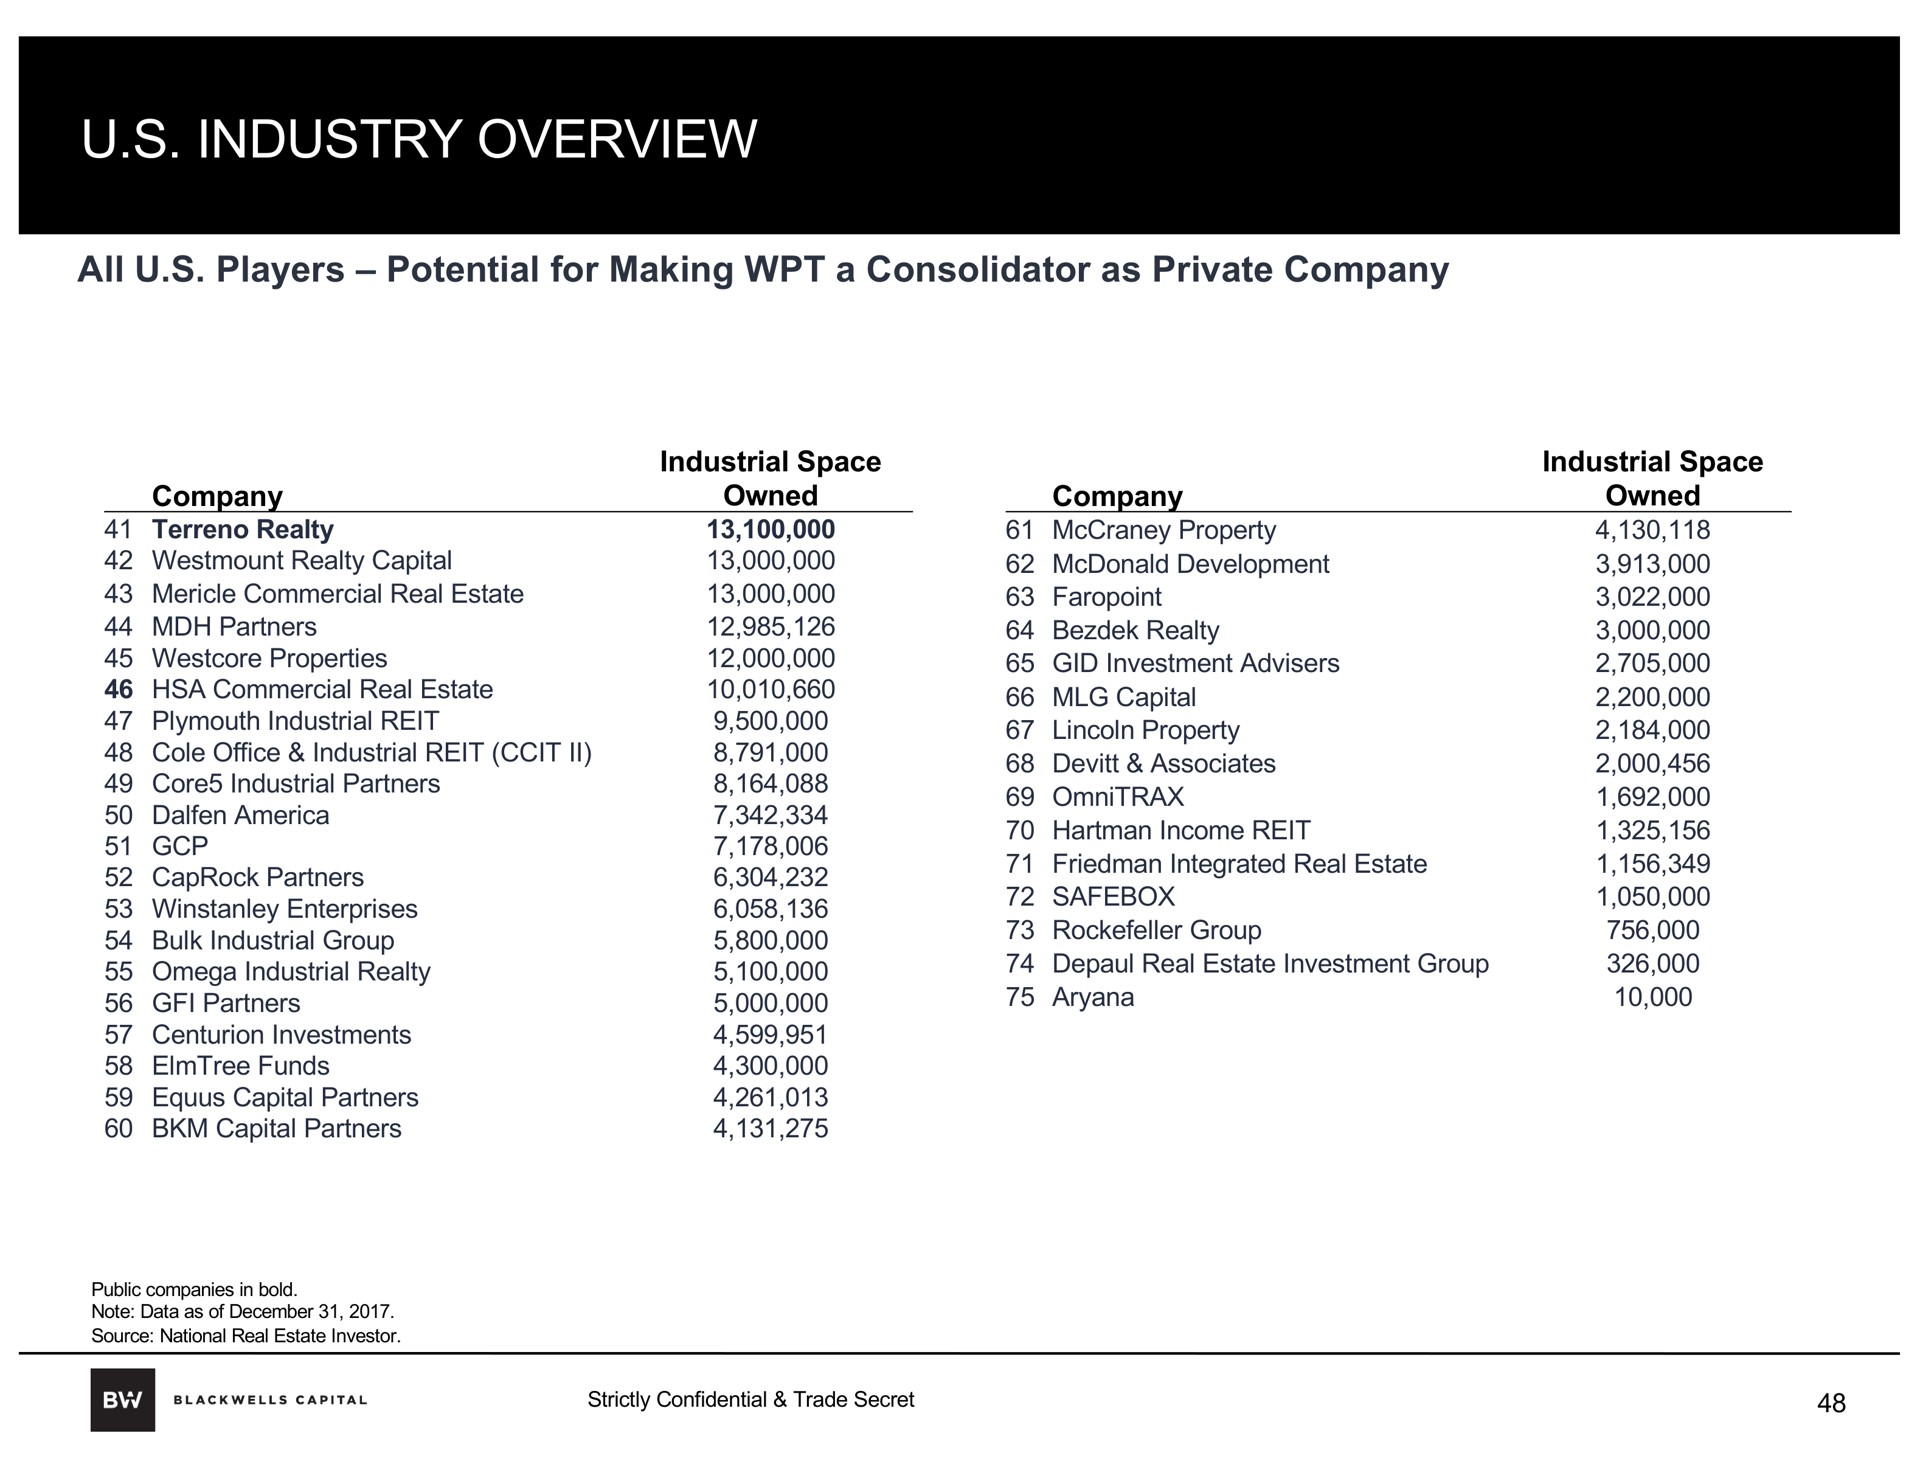 industry overview | Blackwells Capital